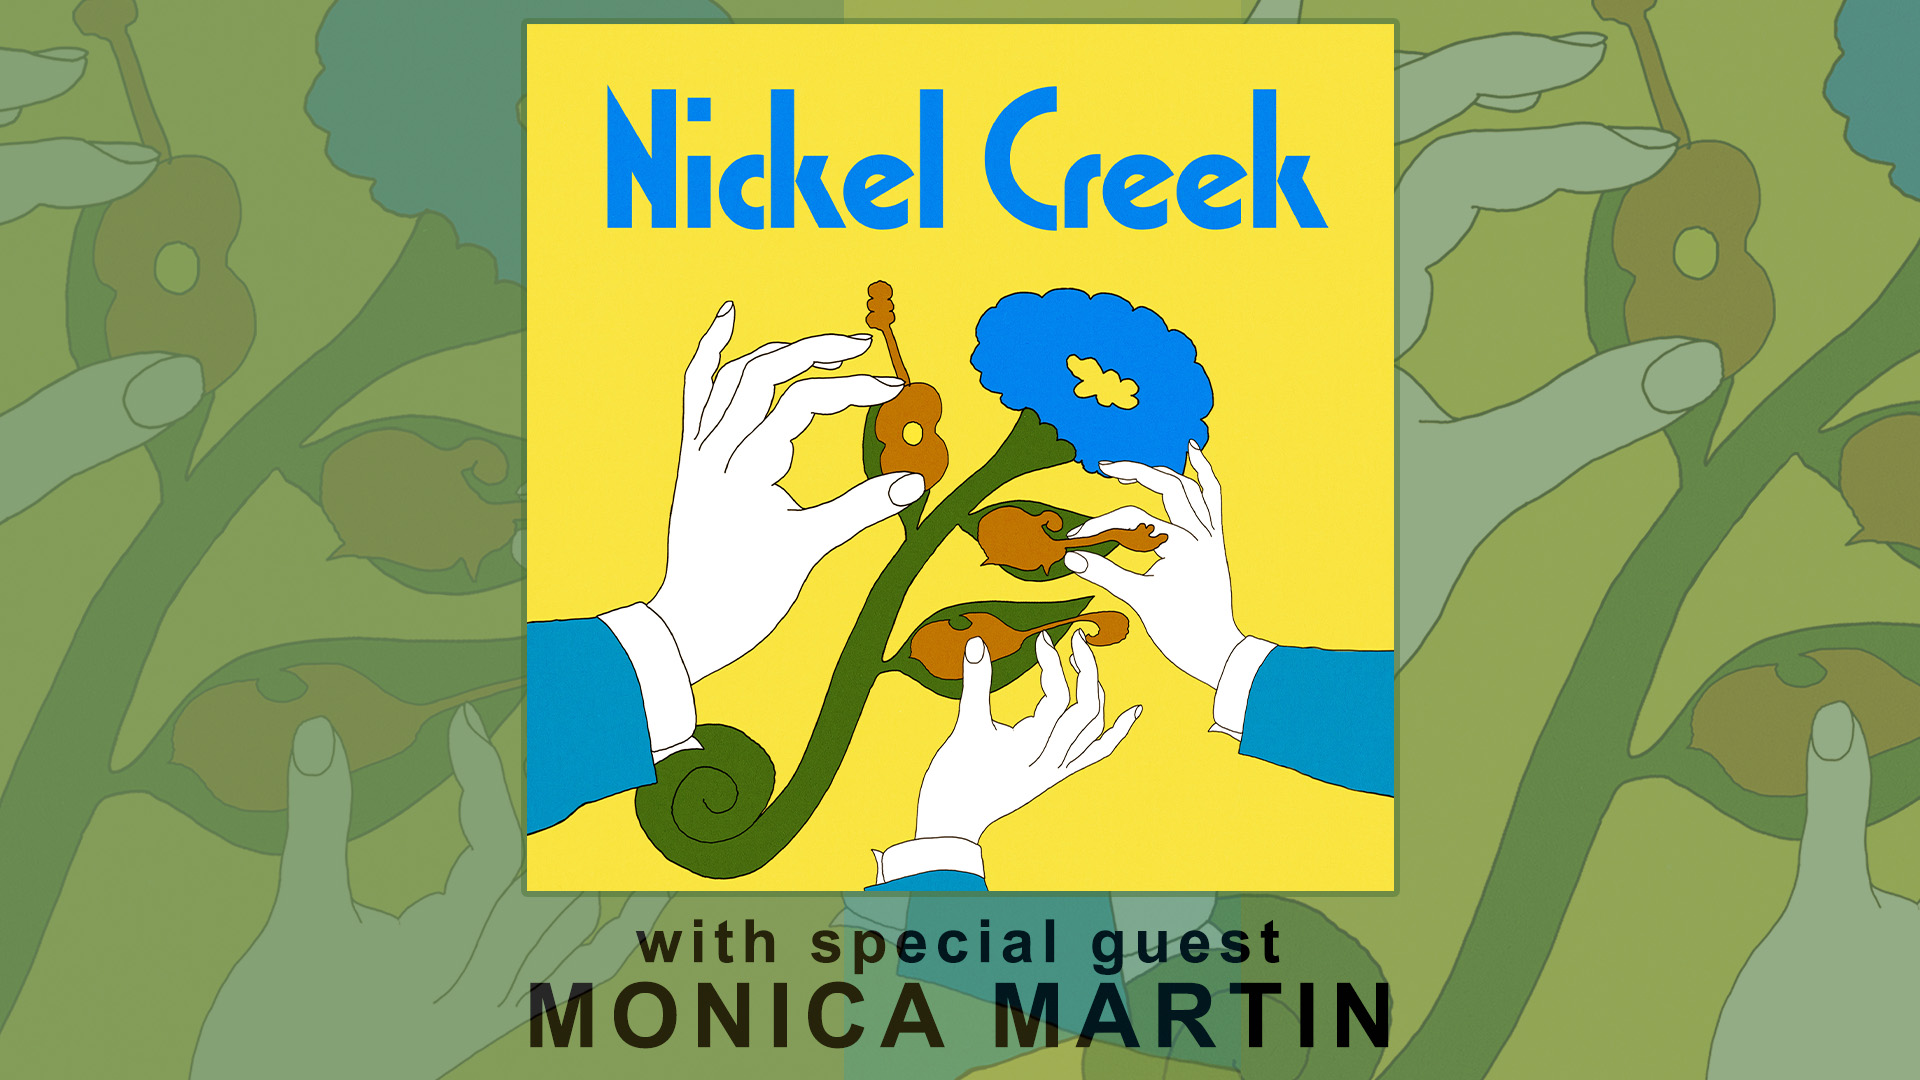 Nickel Creek with special guest Monica Martin